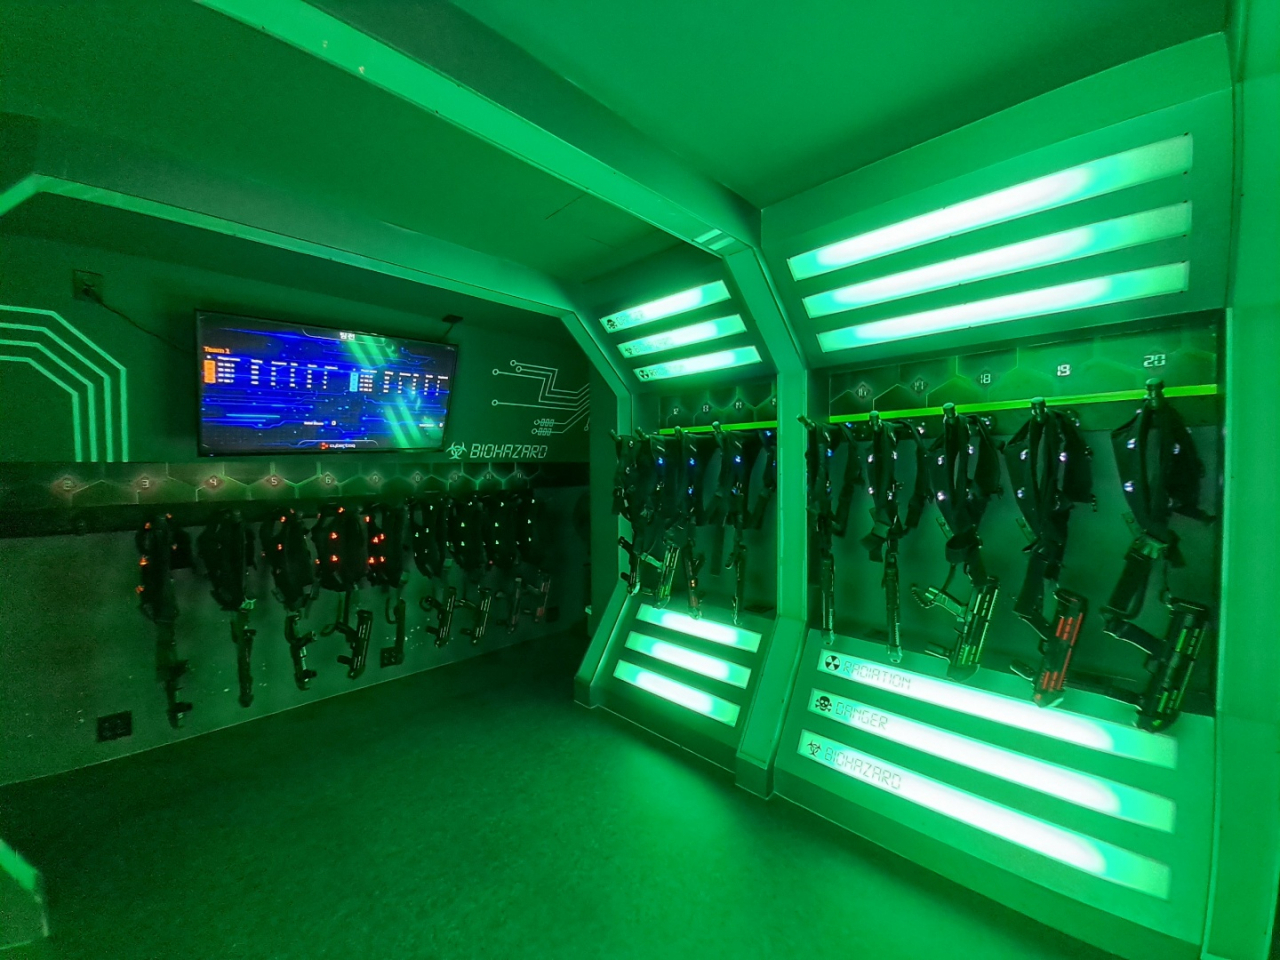 Laser guns and gaming suits are arranged at Laser X. (Lee Si-jin/The Korea Herald)